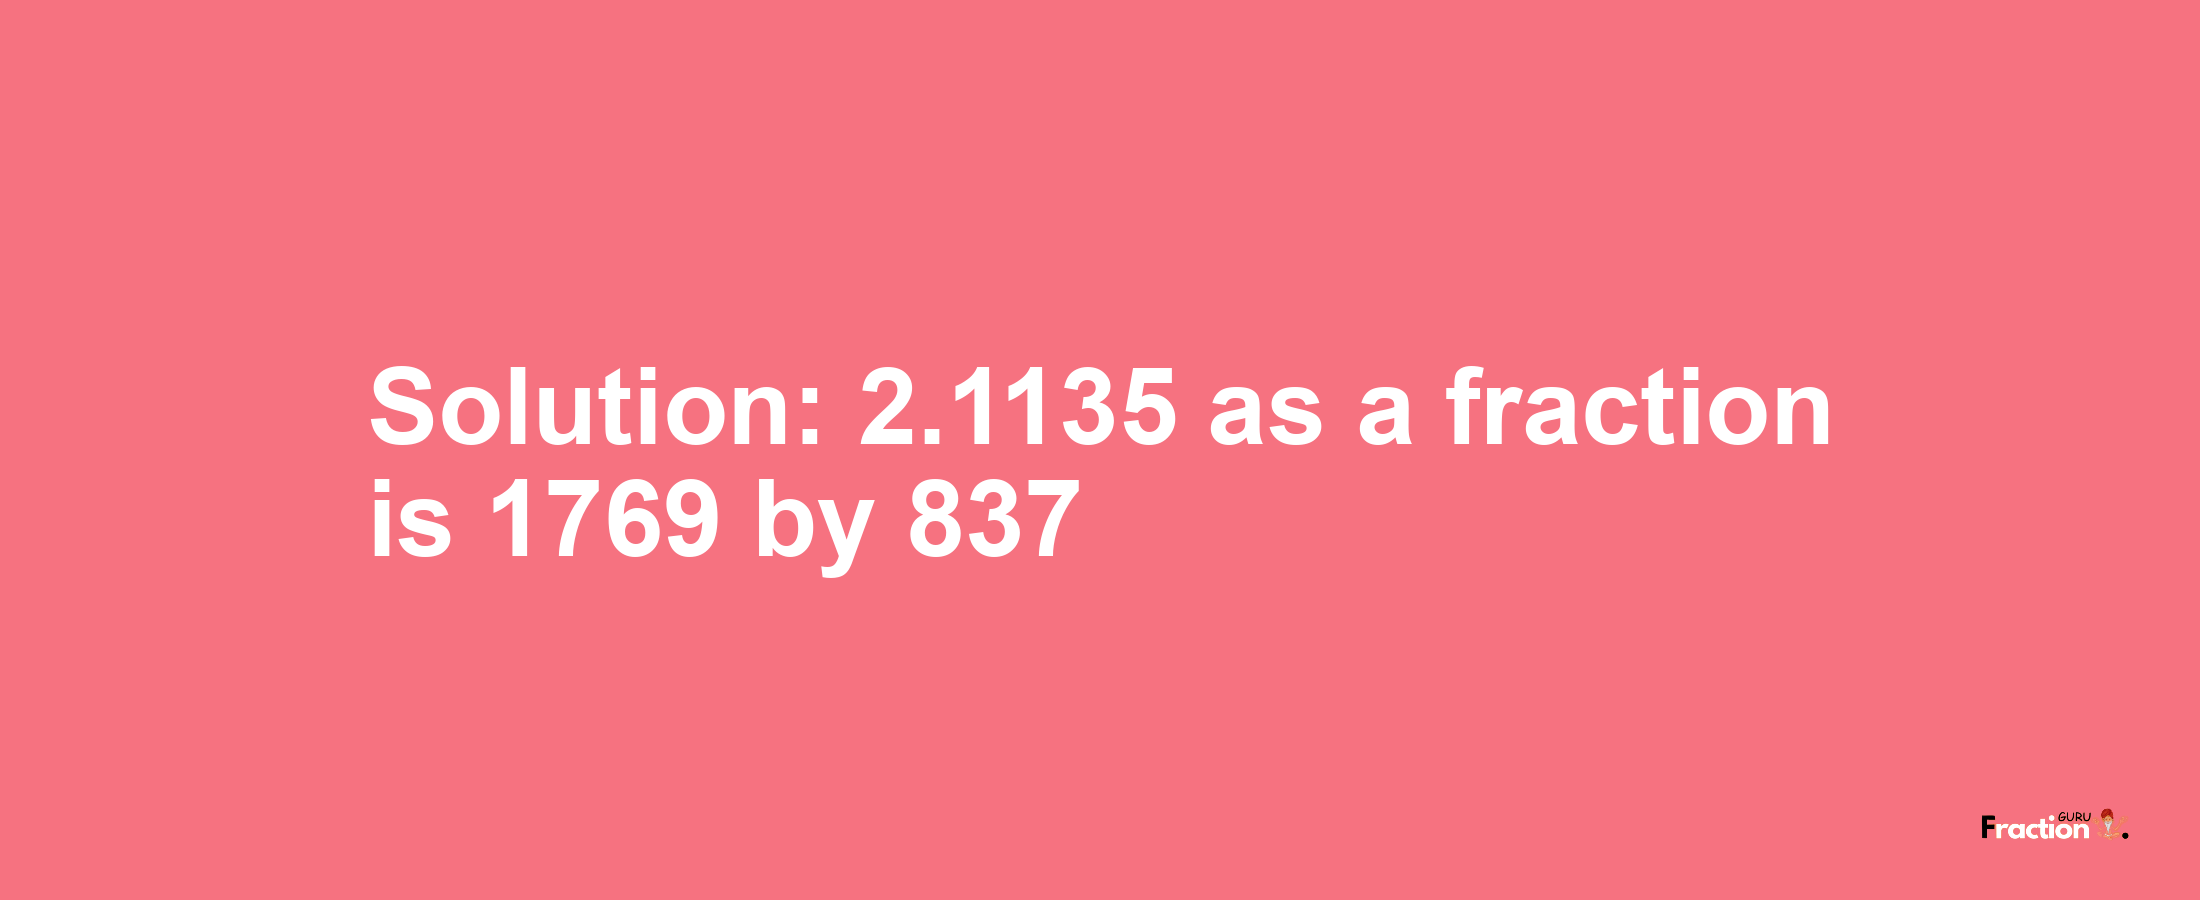 Solution:2.1135 as a fraction is 1769/837